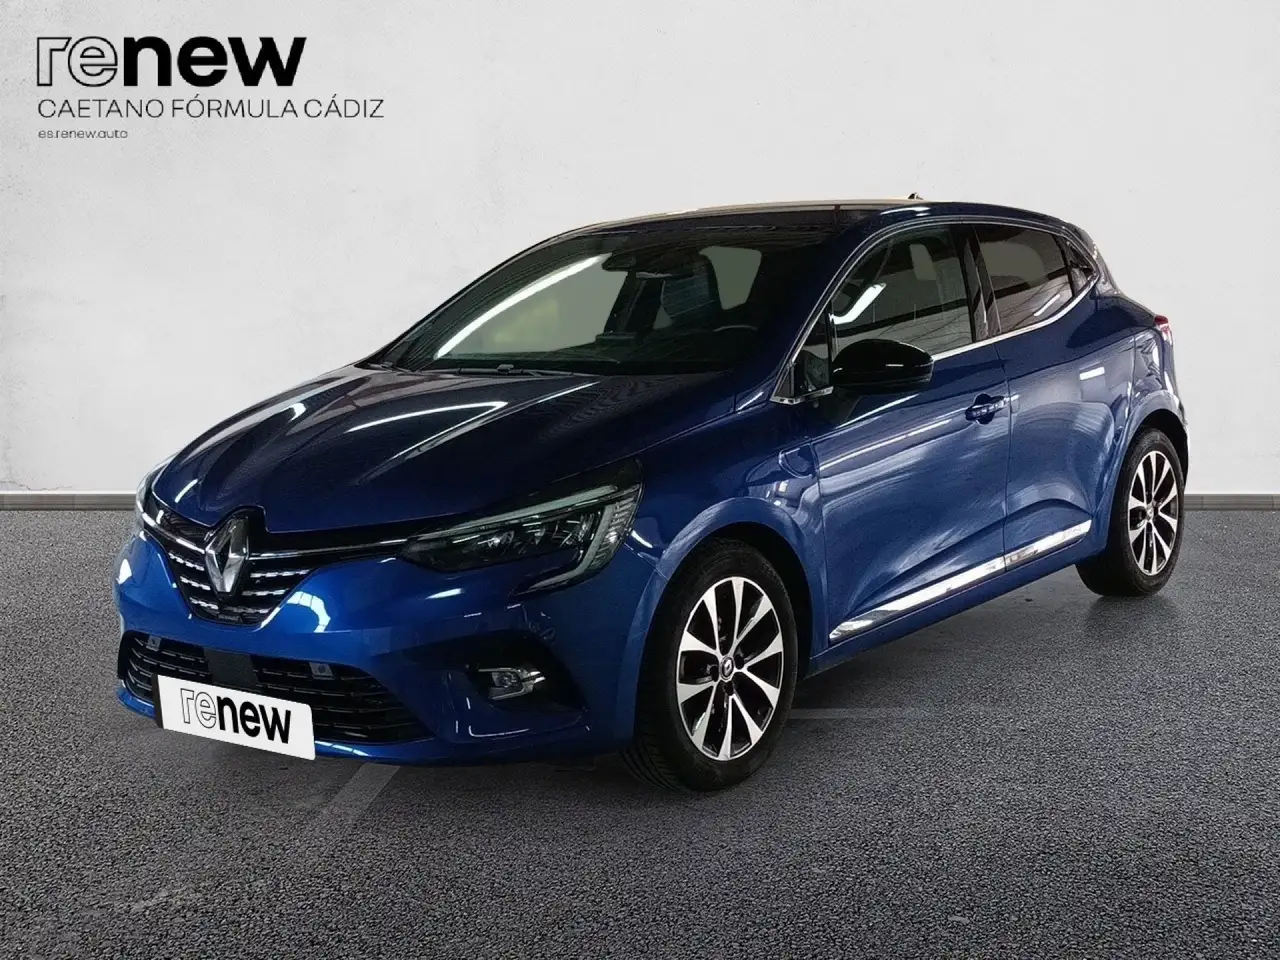  Renting renault clio tce techno 67kw azul 1